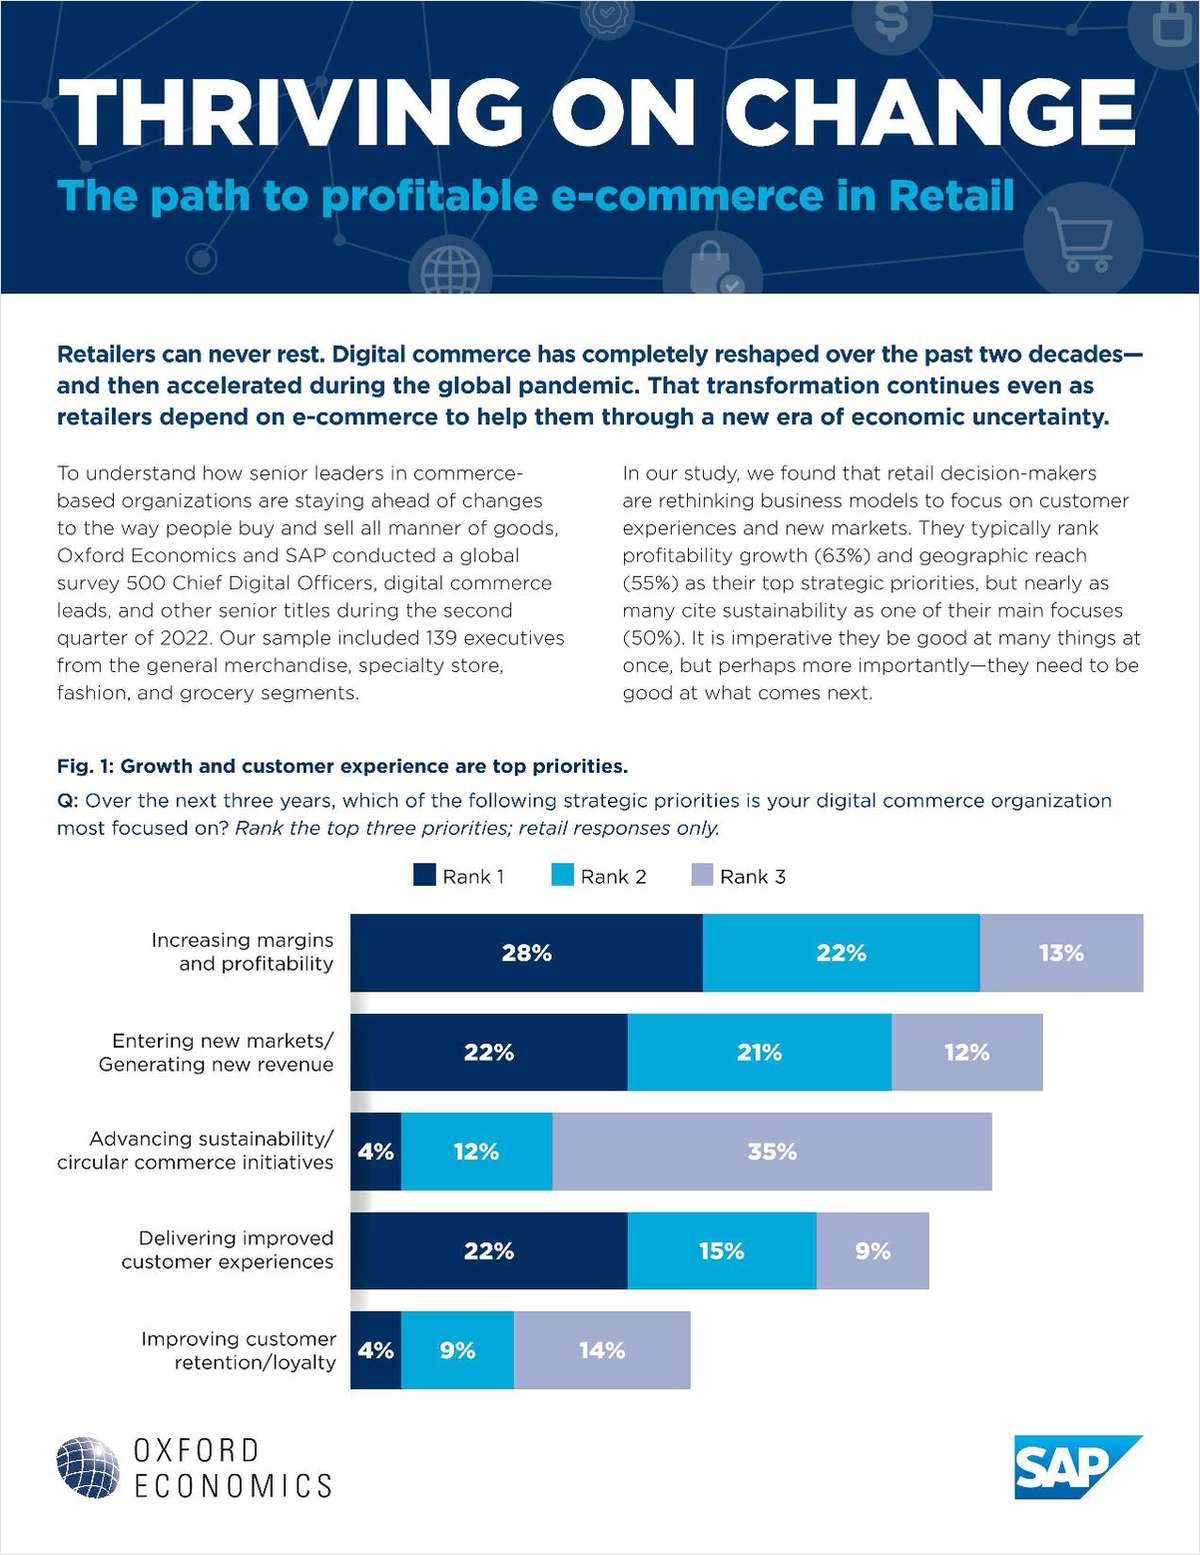 Oxford Economics: Thriving on Change — The Path to Profitable E-Commerce in Retail